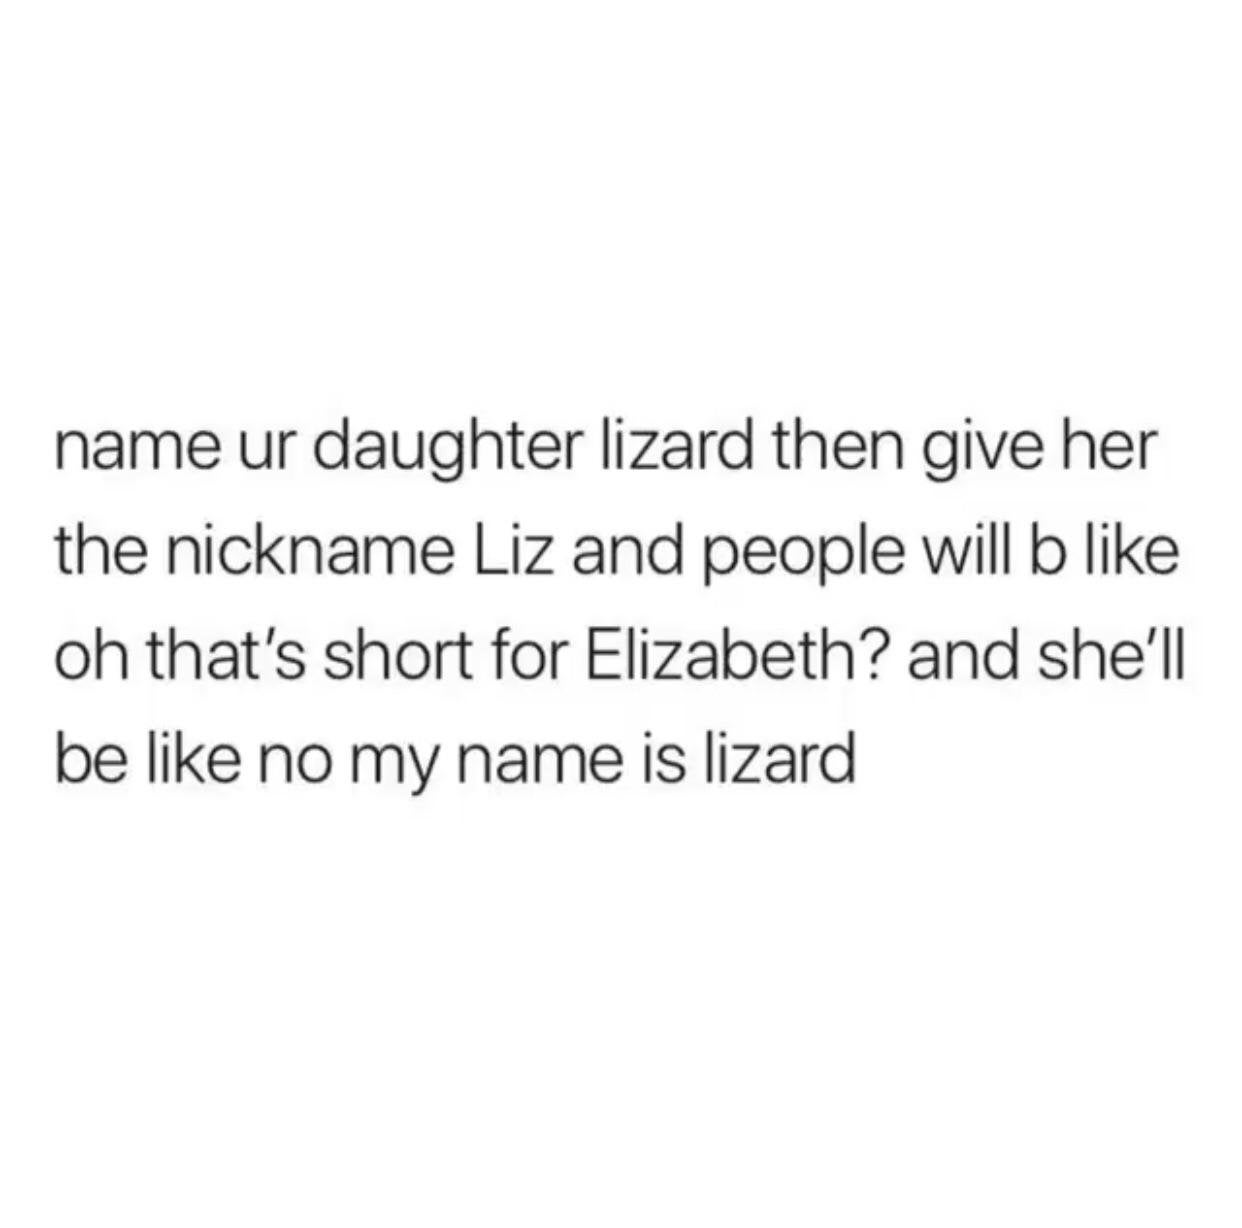 daily dose of randoms - name your daughter lizard - name ur daughter lizard then give her the nickname Liz and people will b oh that's short for Elizabeth? and she'll be no my name is lizard